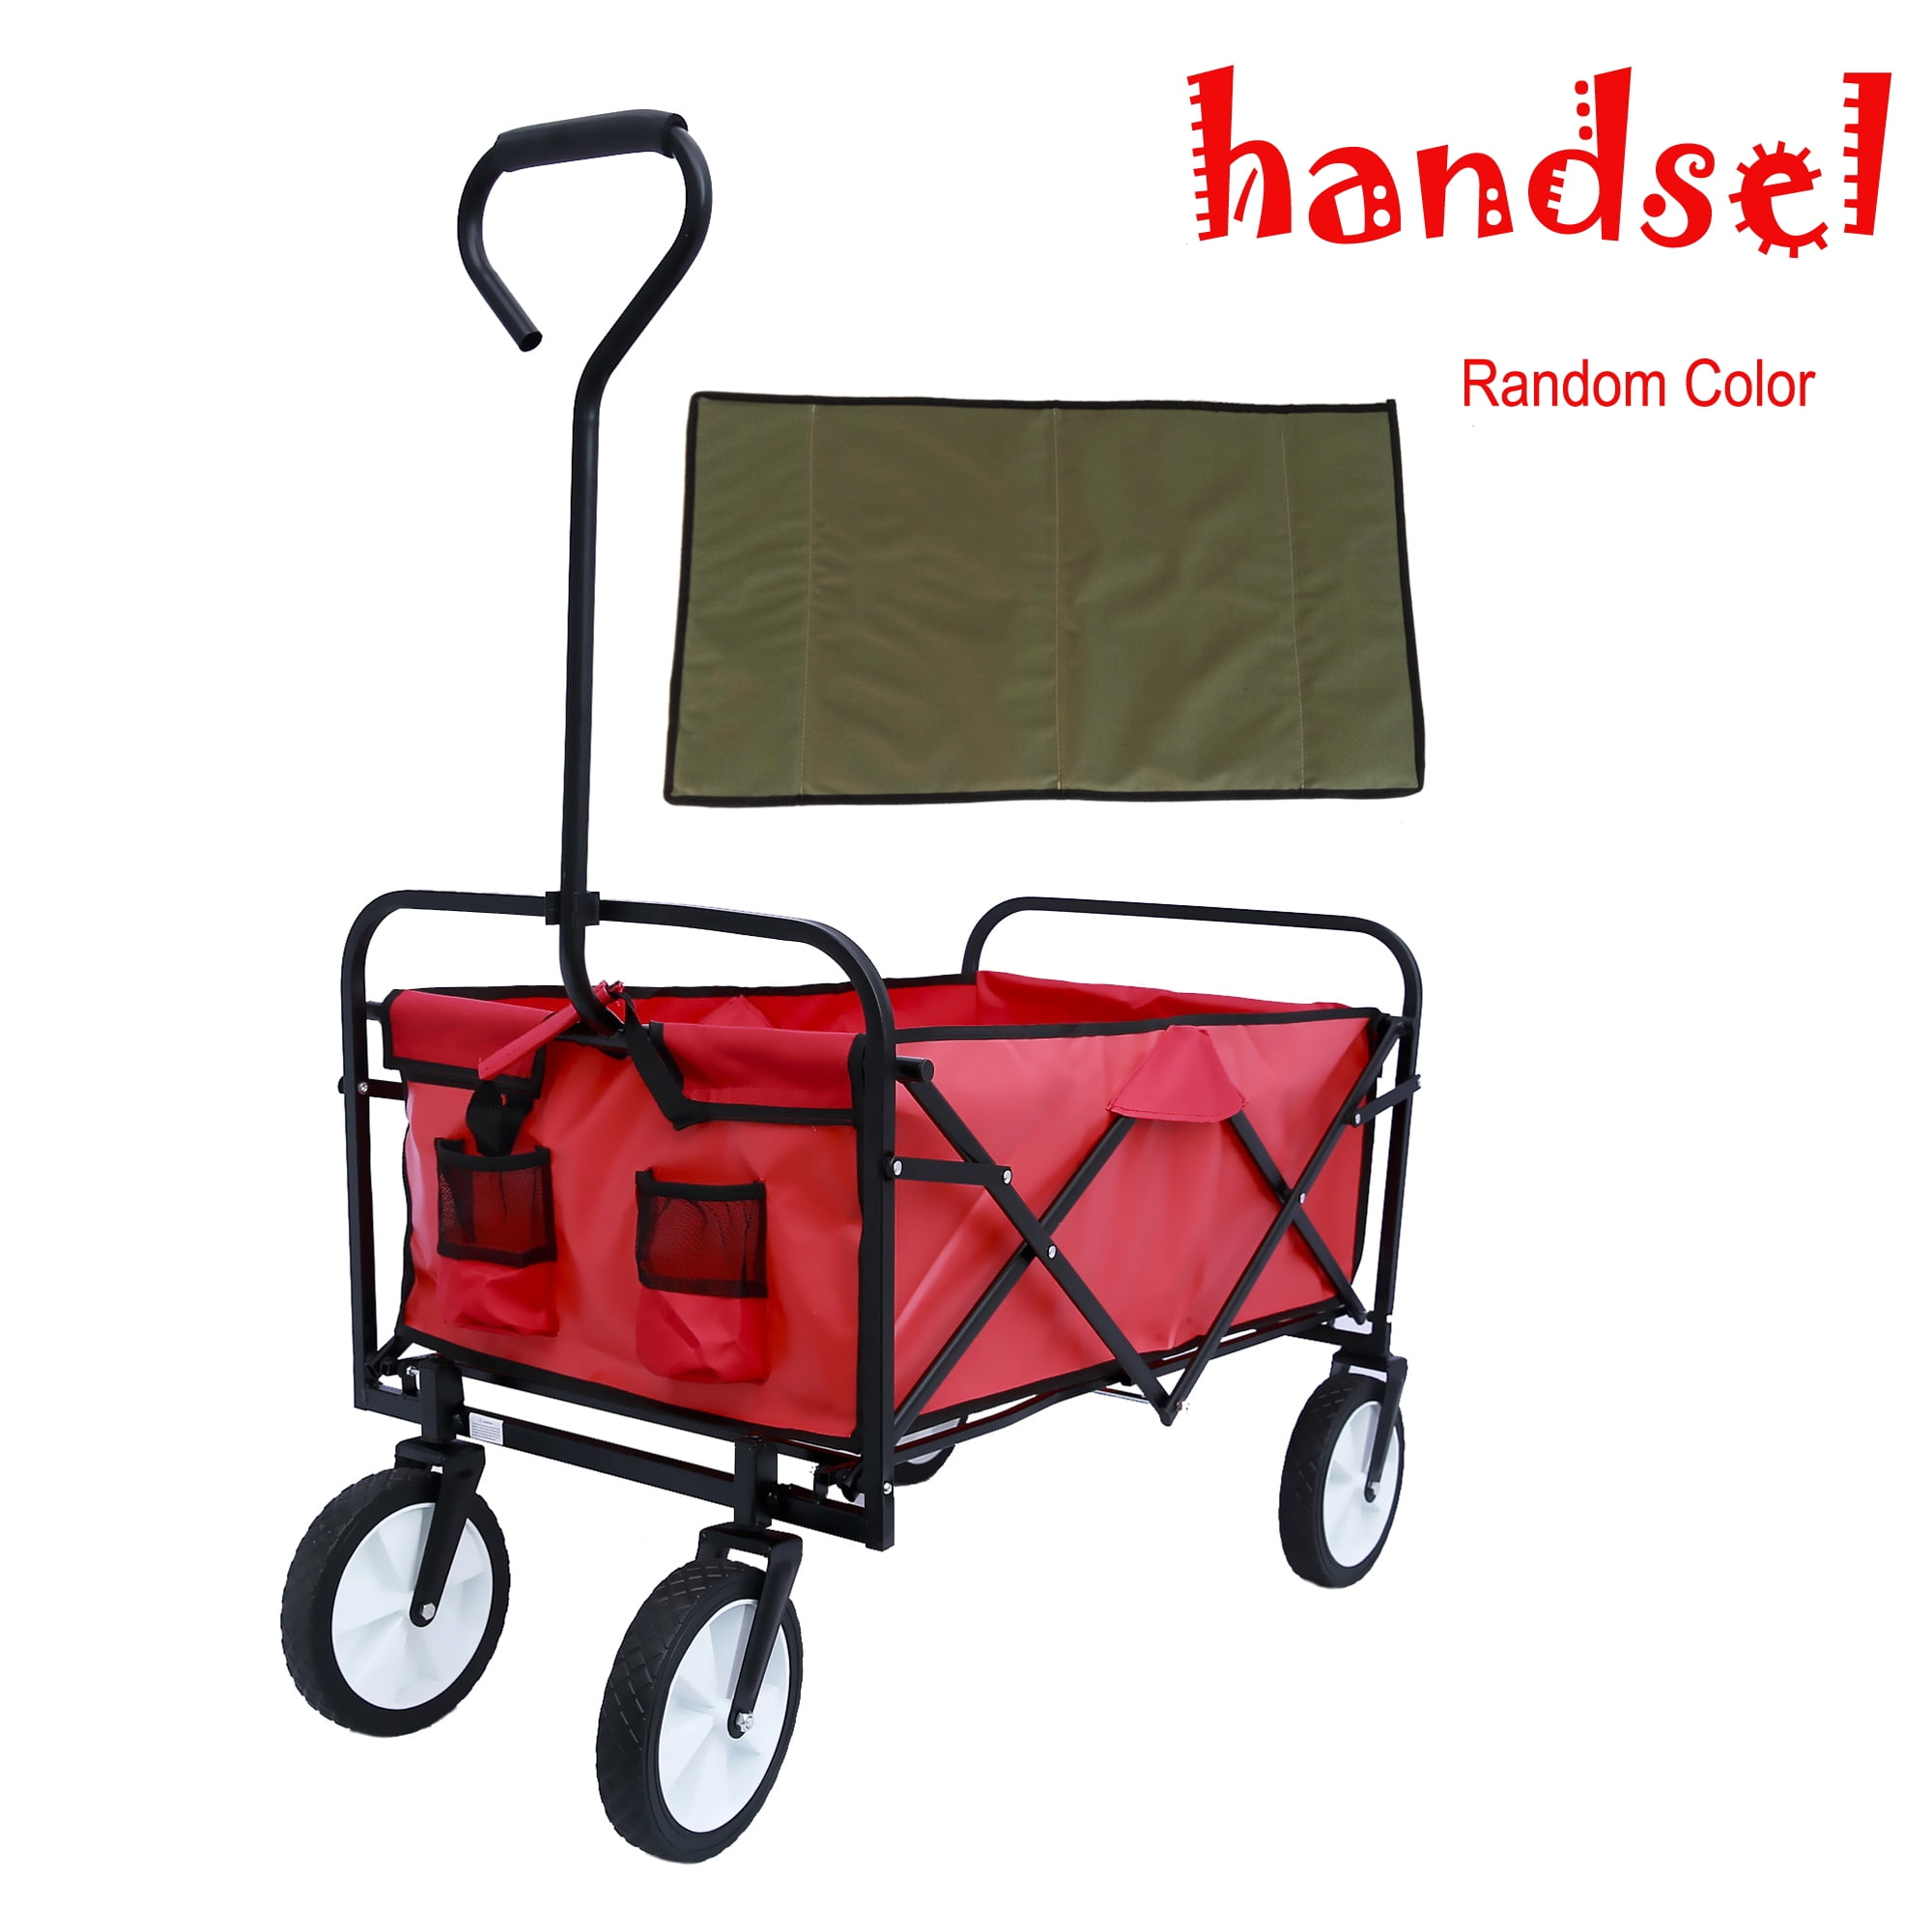 Garden Portable Folding Heavy-Duty Utility Cart W/7.8'' Brake Wheel Beach Adjustable Handle Capacity Weight 170 LBS for Grocery Sport Outdoor Collapsible Wagon RED Carry Bag Shop 